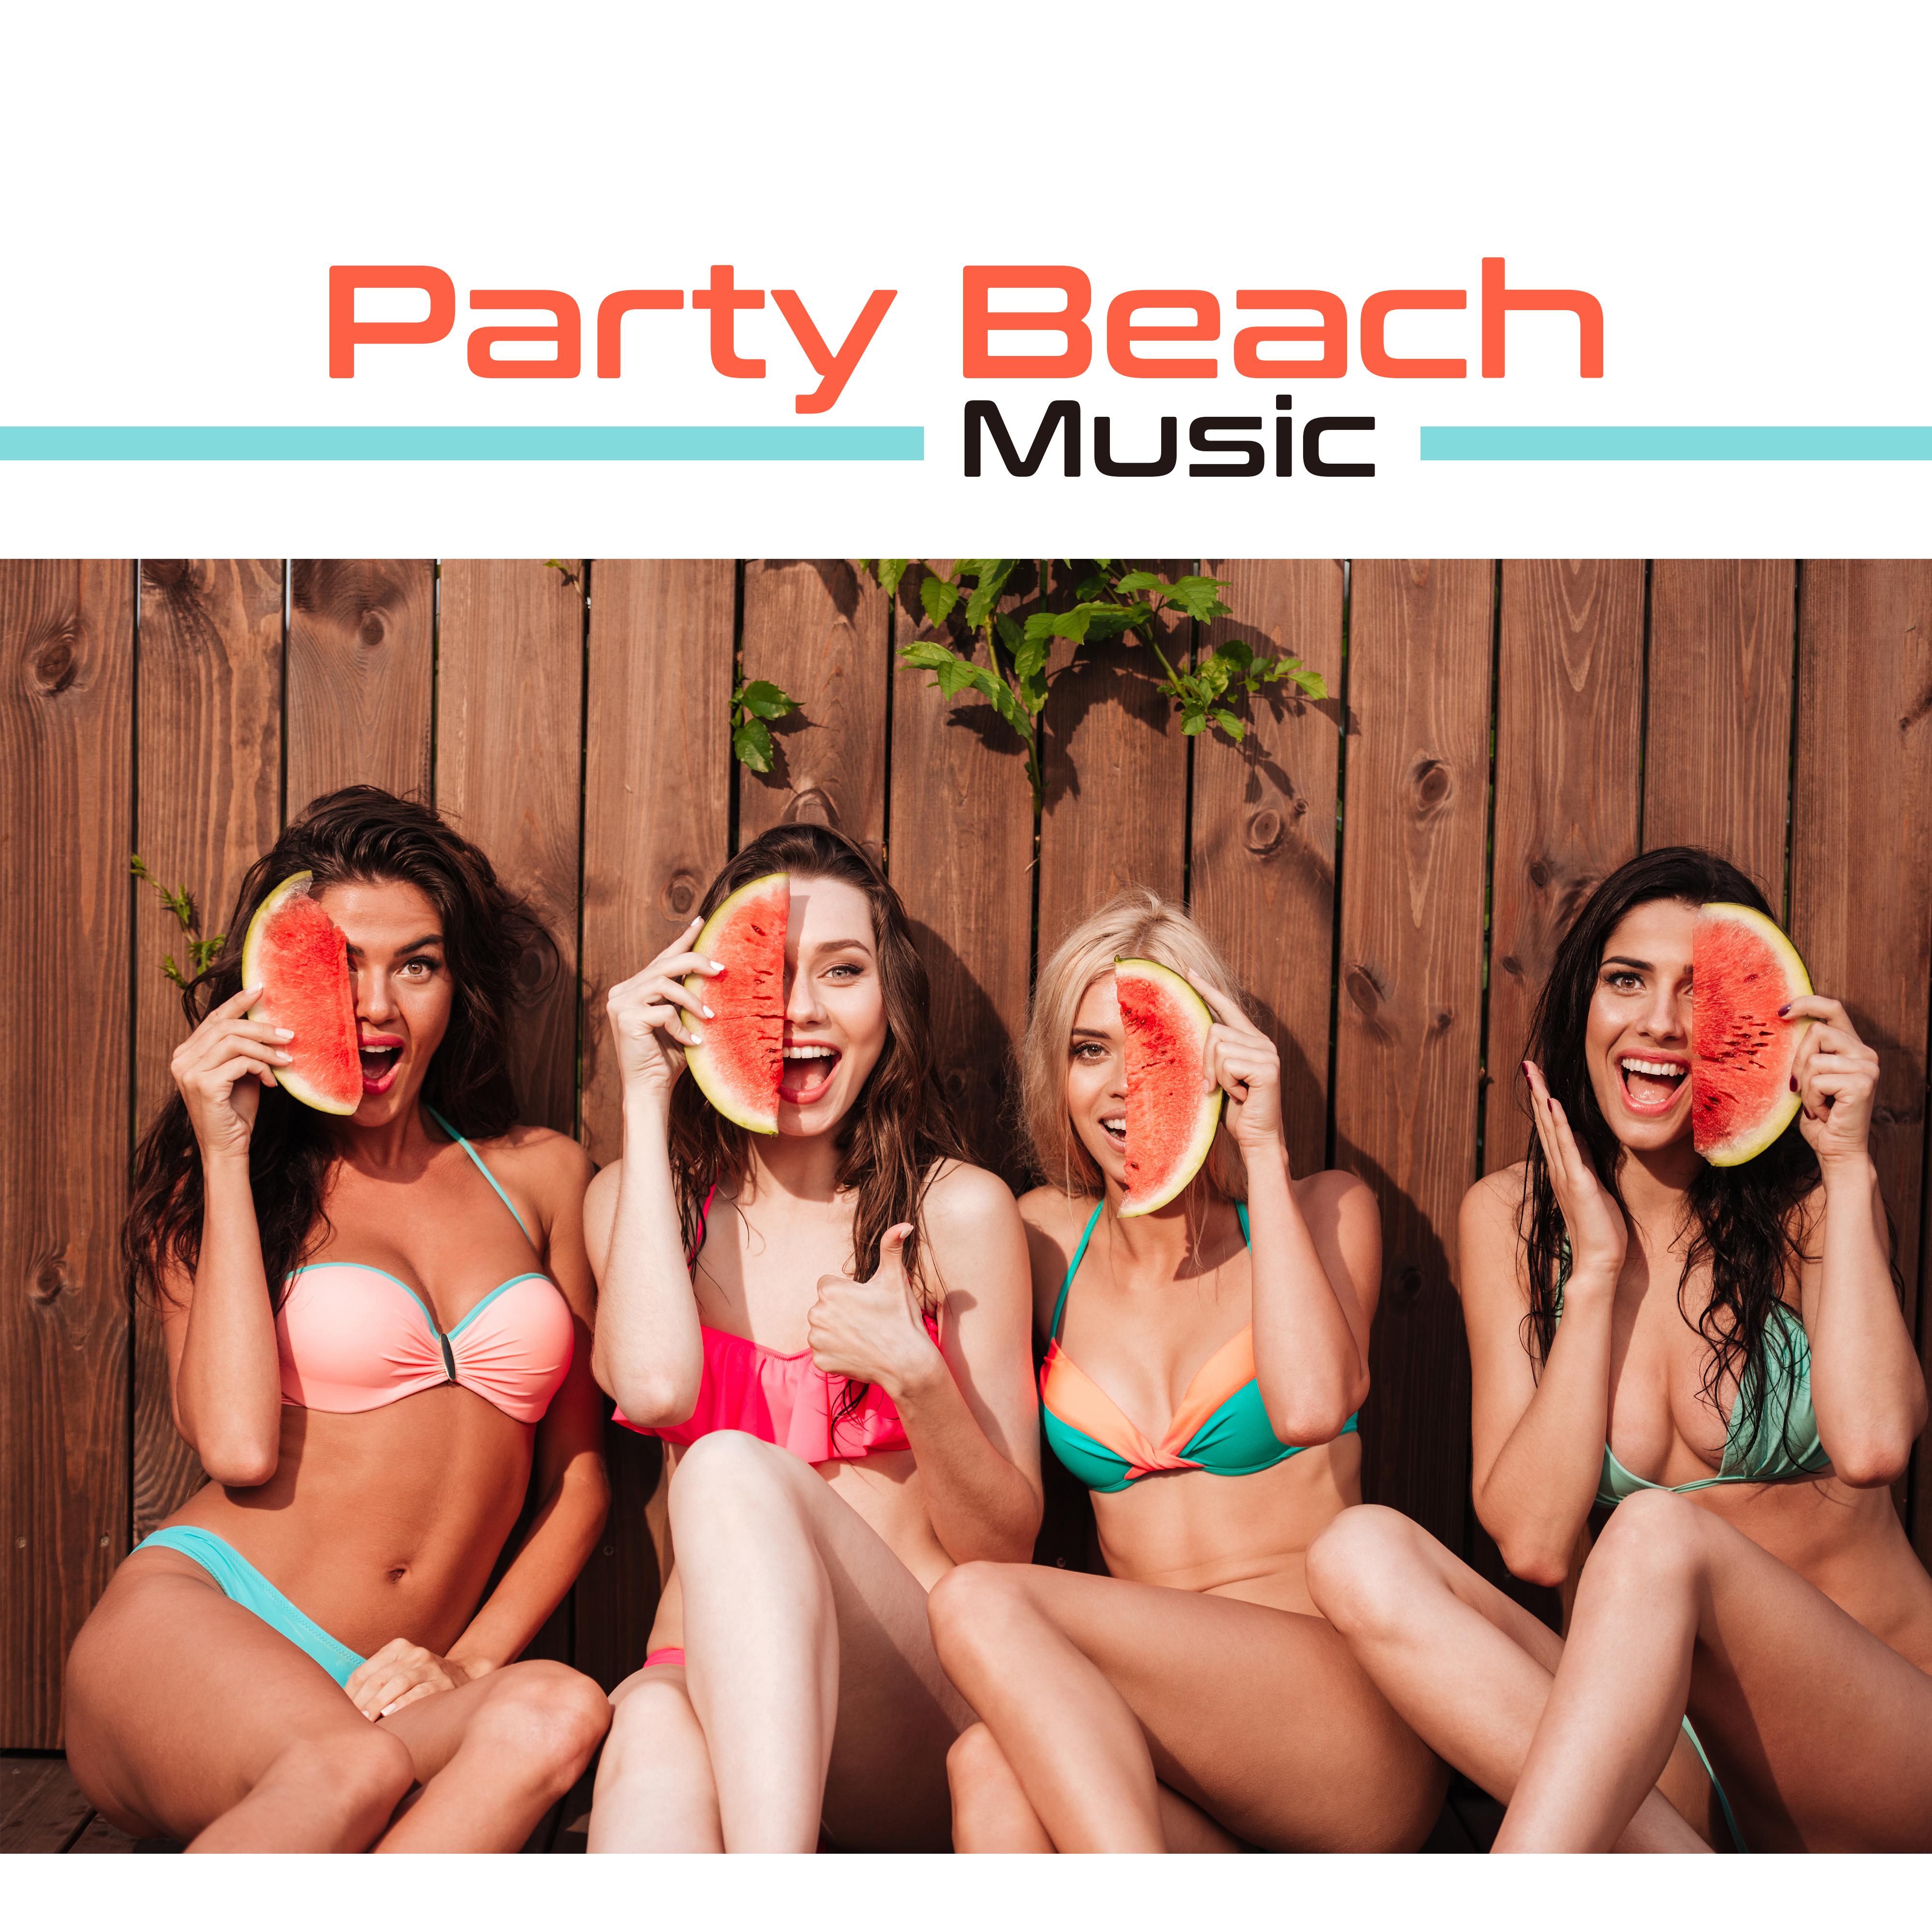 Party Beach Music  Chill Out Music, Ibiza Party Time, Summer Beach Sounds, All Night Fun